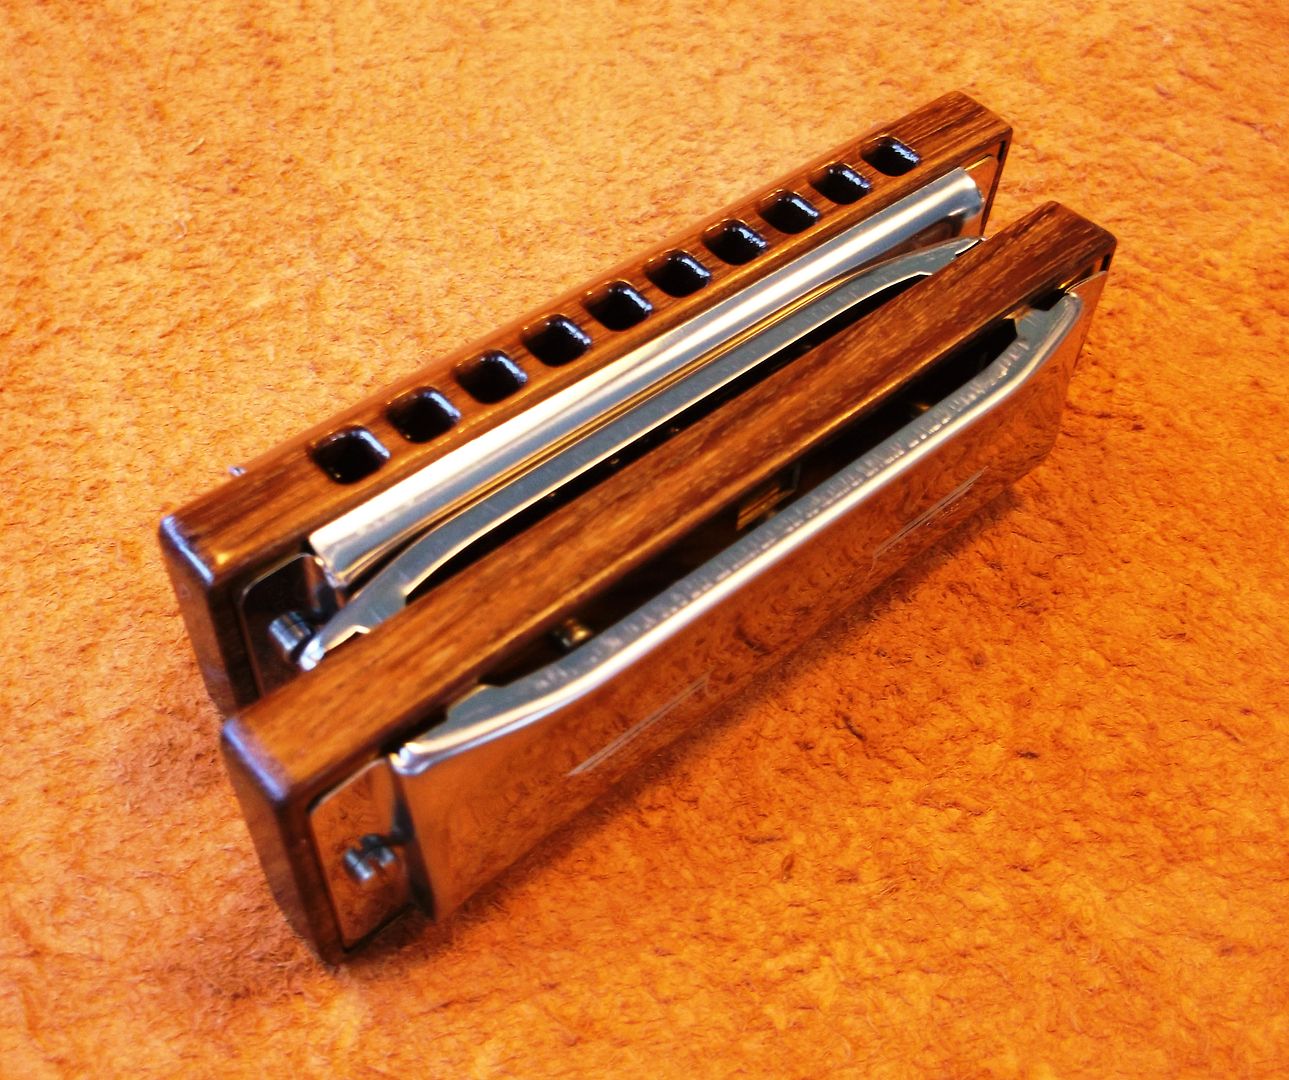 Hohner Special 20's with Milled Rosewood Combs photo DSCF4573_zpsw7rw9gd3.jpg